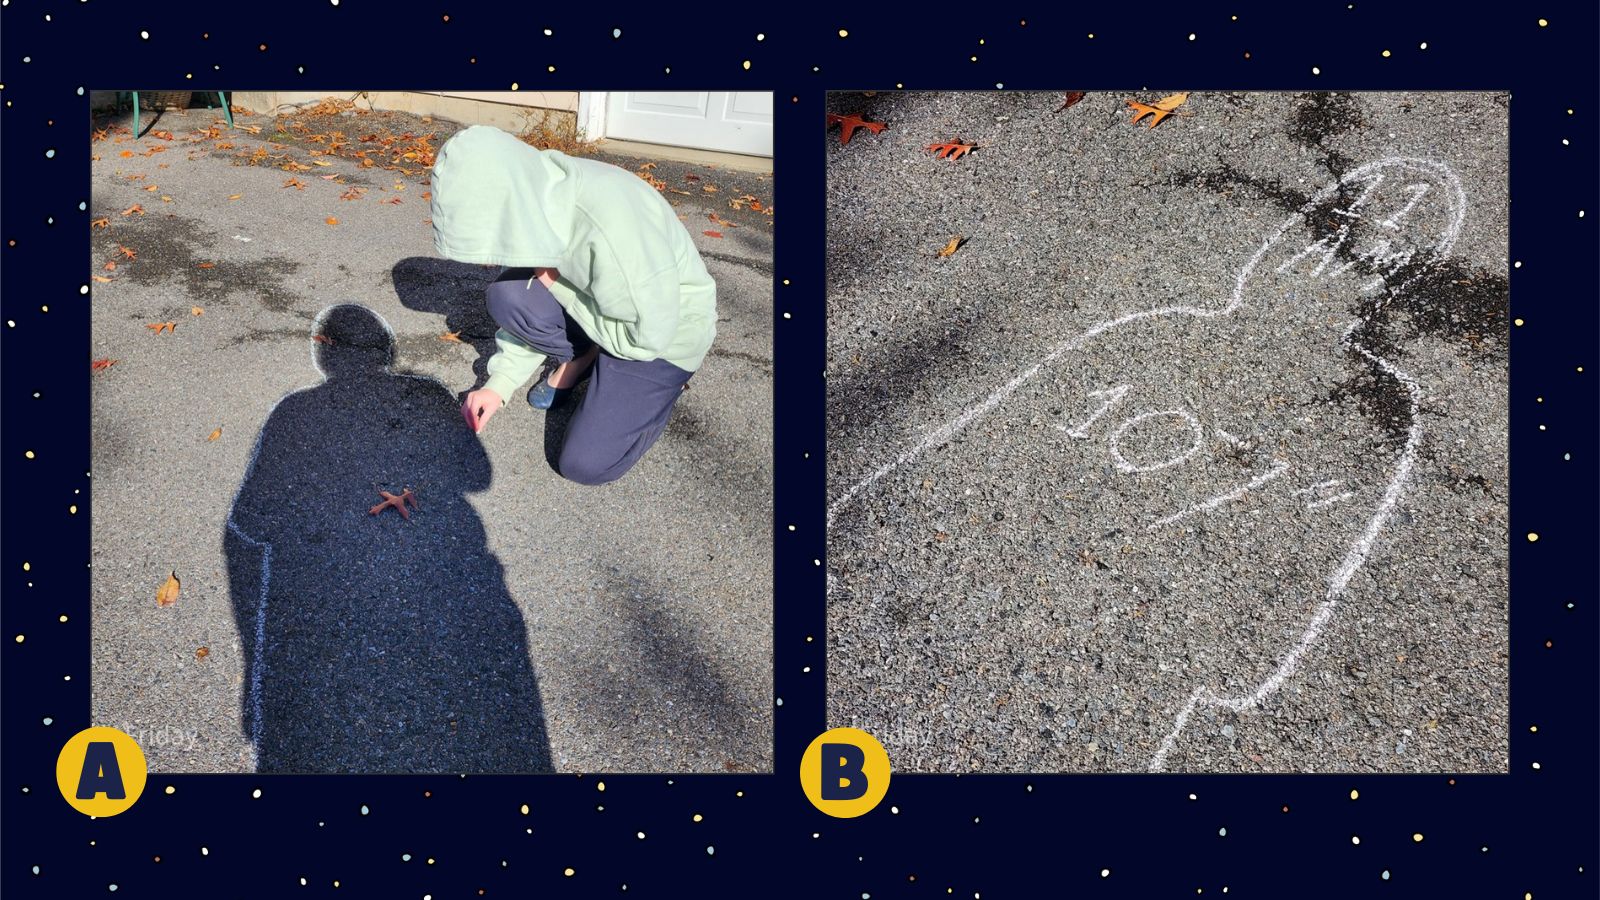 Two photos. On the left, a student traces a shadow using chalk onto blacktop. On the right, an outline of a person’s shadow labeled 11 am and 107 inches.